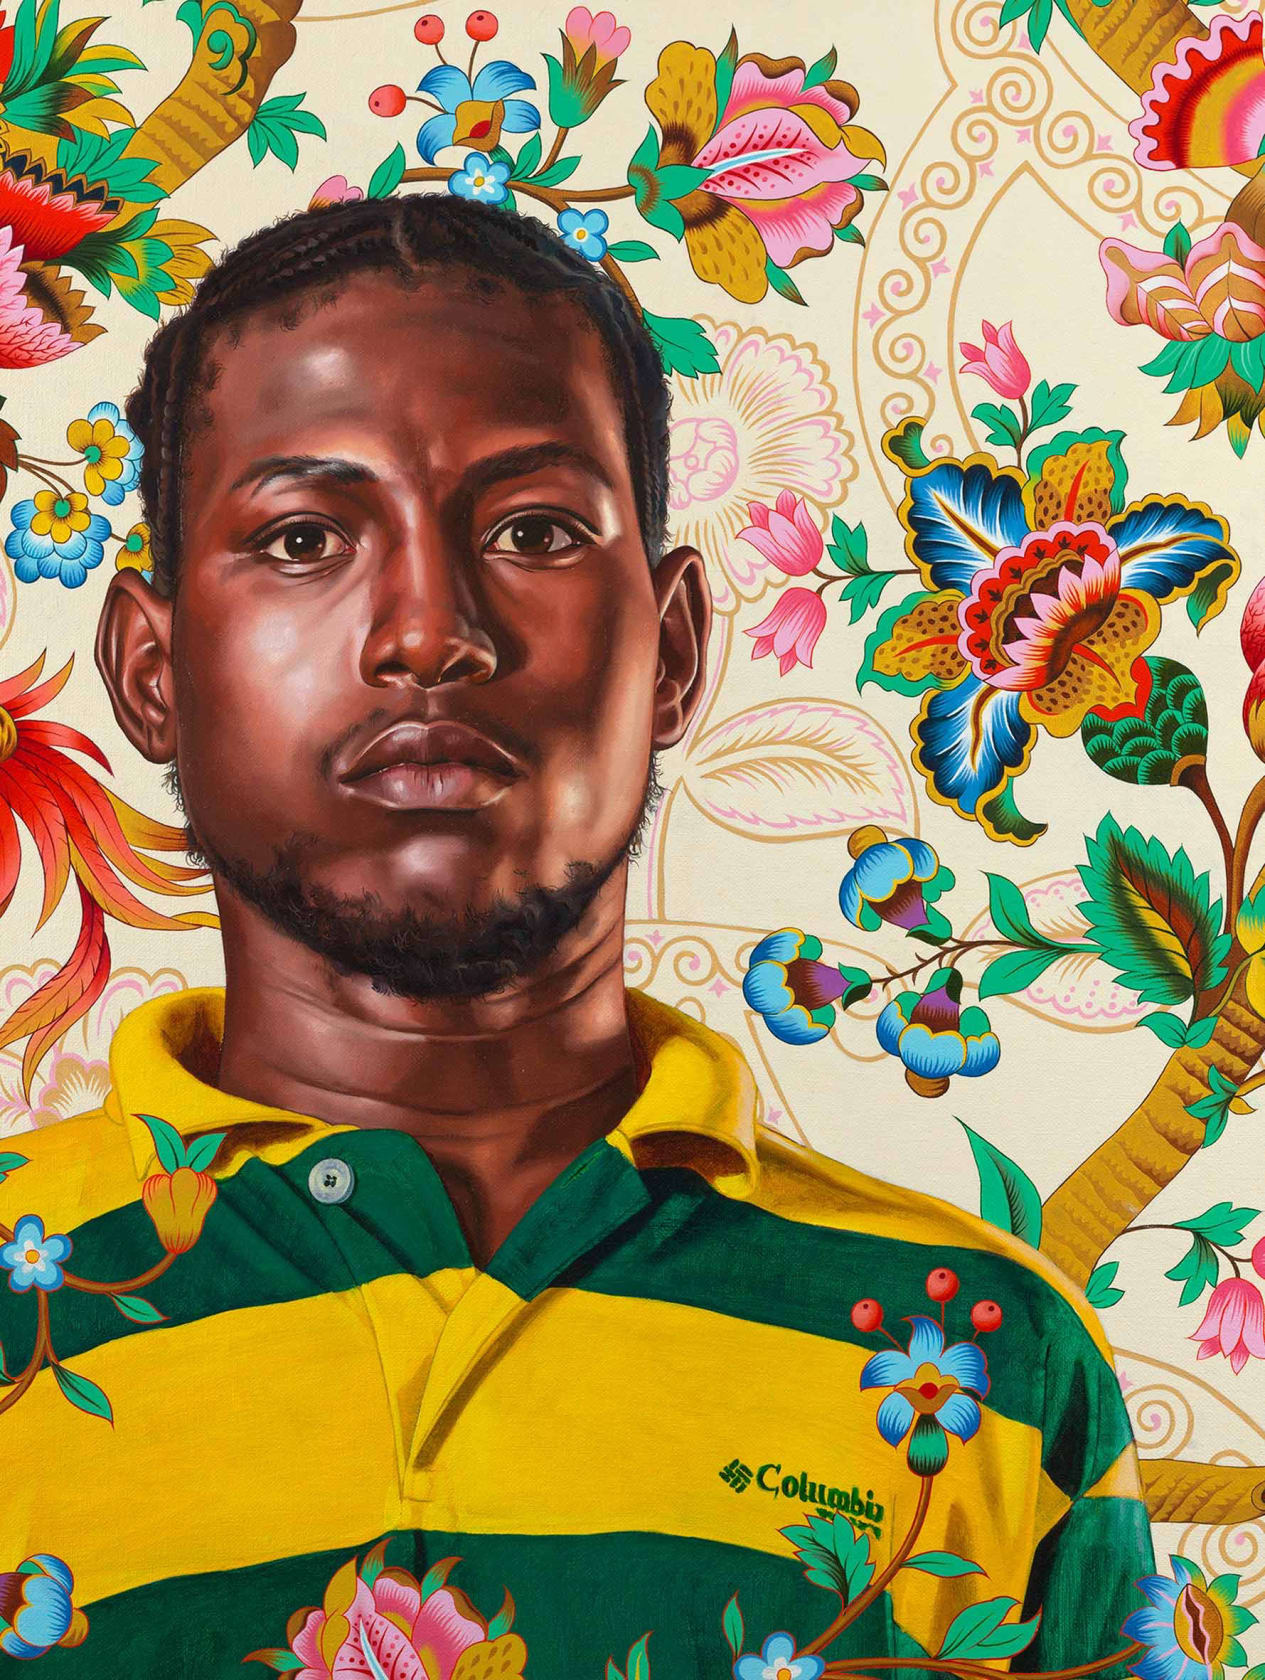 Death of St. Joseph Basketball by Kehinde Wiley – Artware Editions